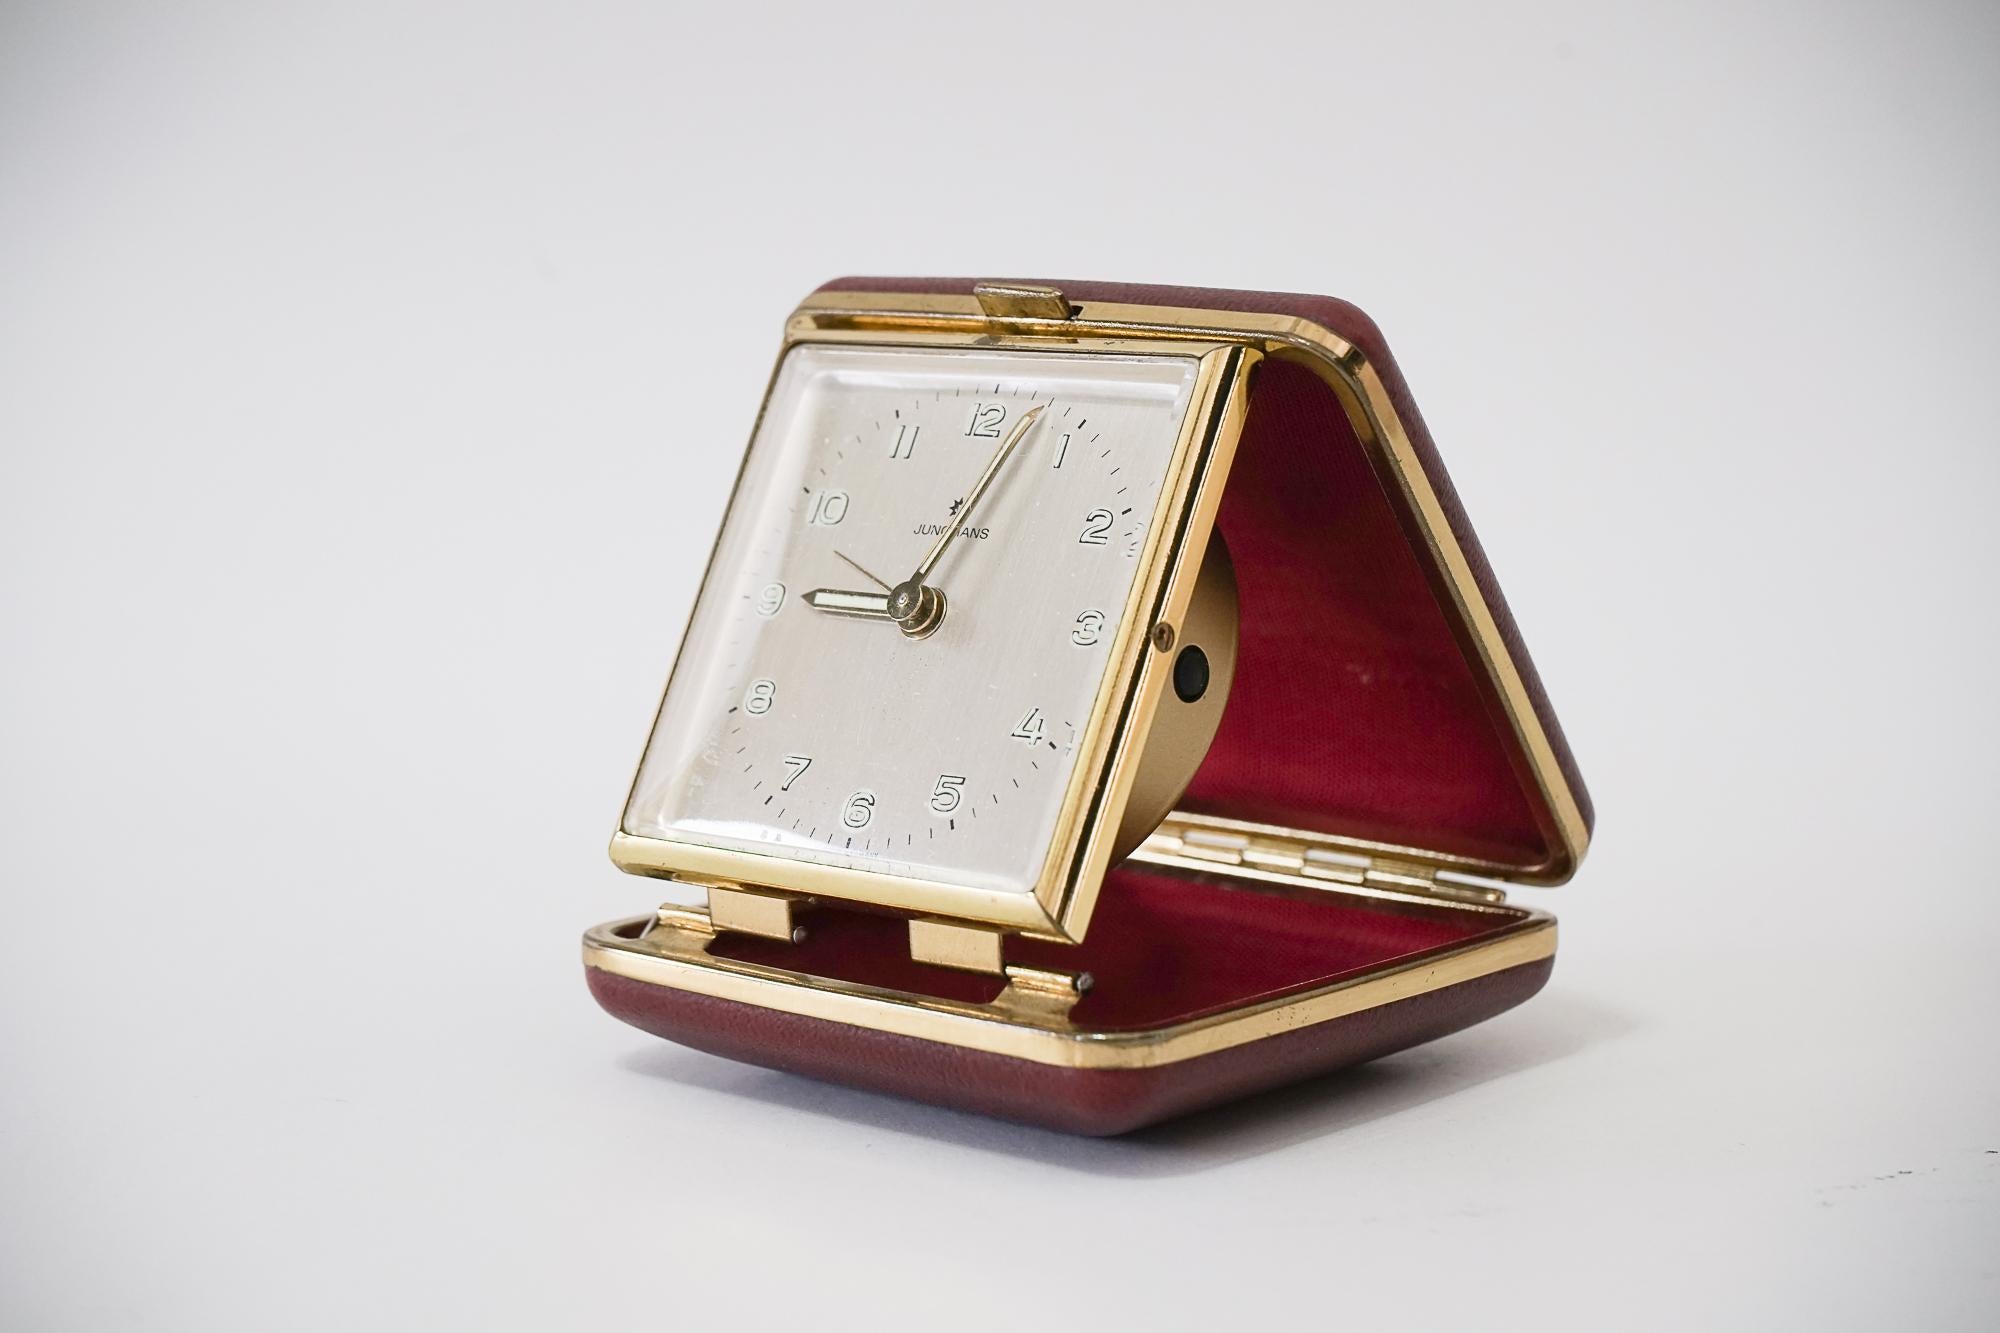 Travel alarm clock by Junghans, circa 1960s
Original condition
Brass with red faux leather cover
Still working
Measures: Open height 8cm, wide 7cm, deep 7cm
Closed height 3cm, wide 7cm, deep 7cm.